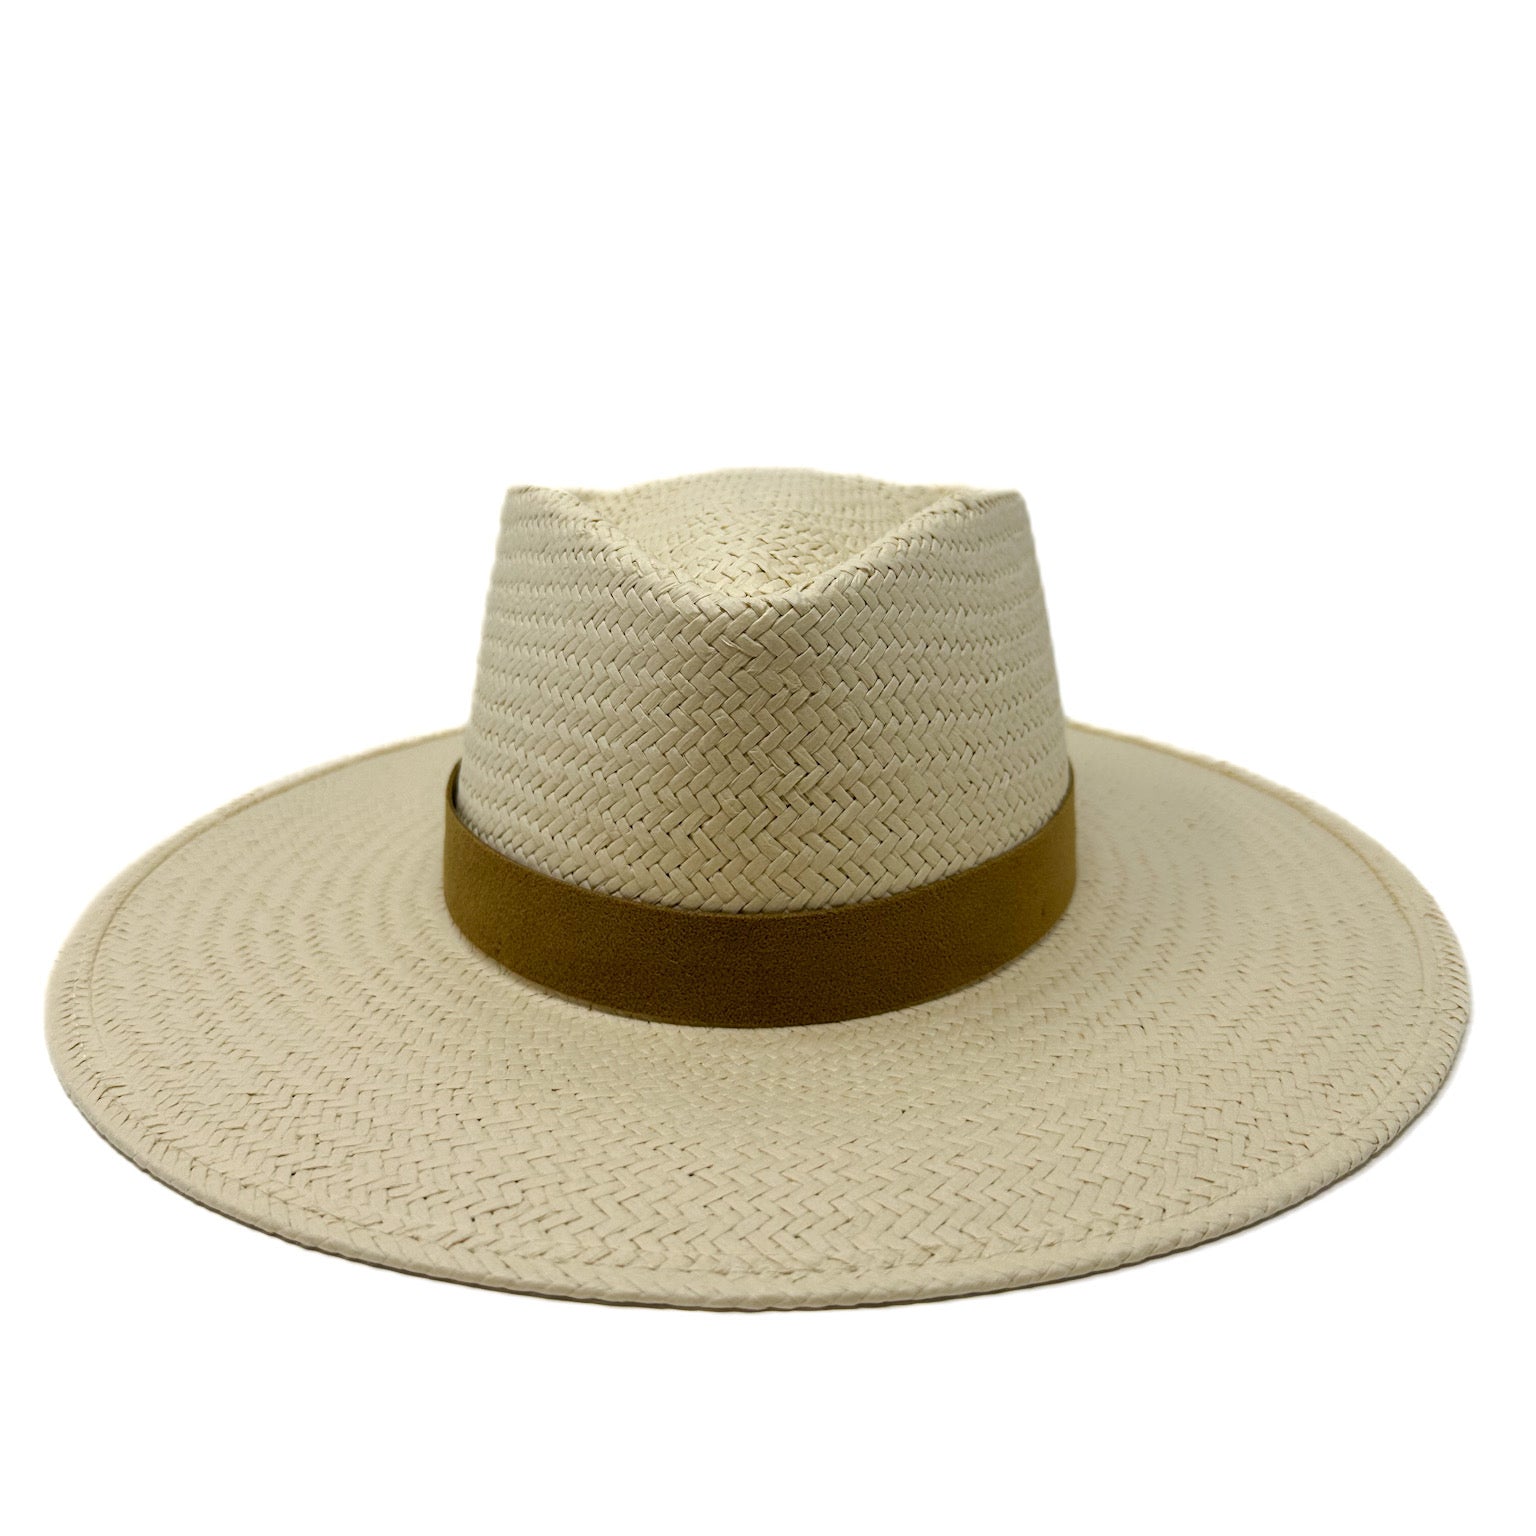 SAN PANCHO PACKABLE STRAW FEDORA shell